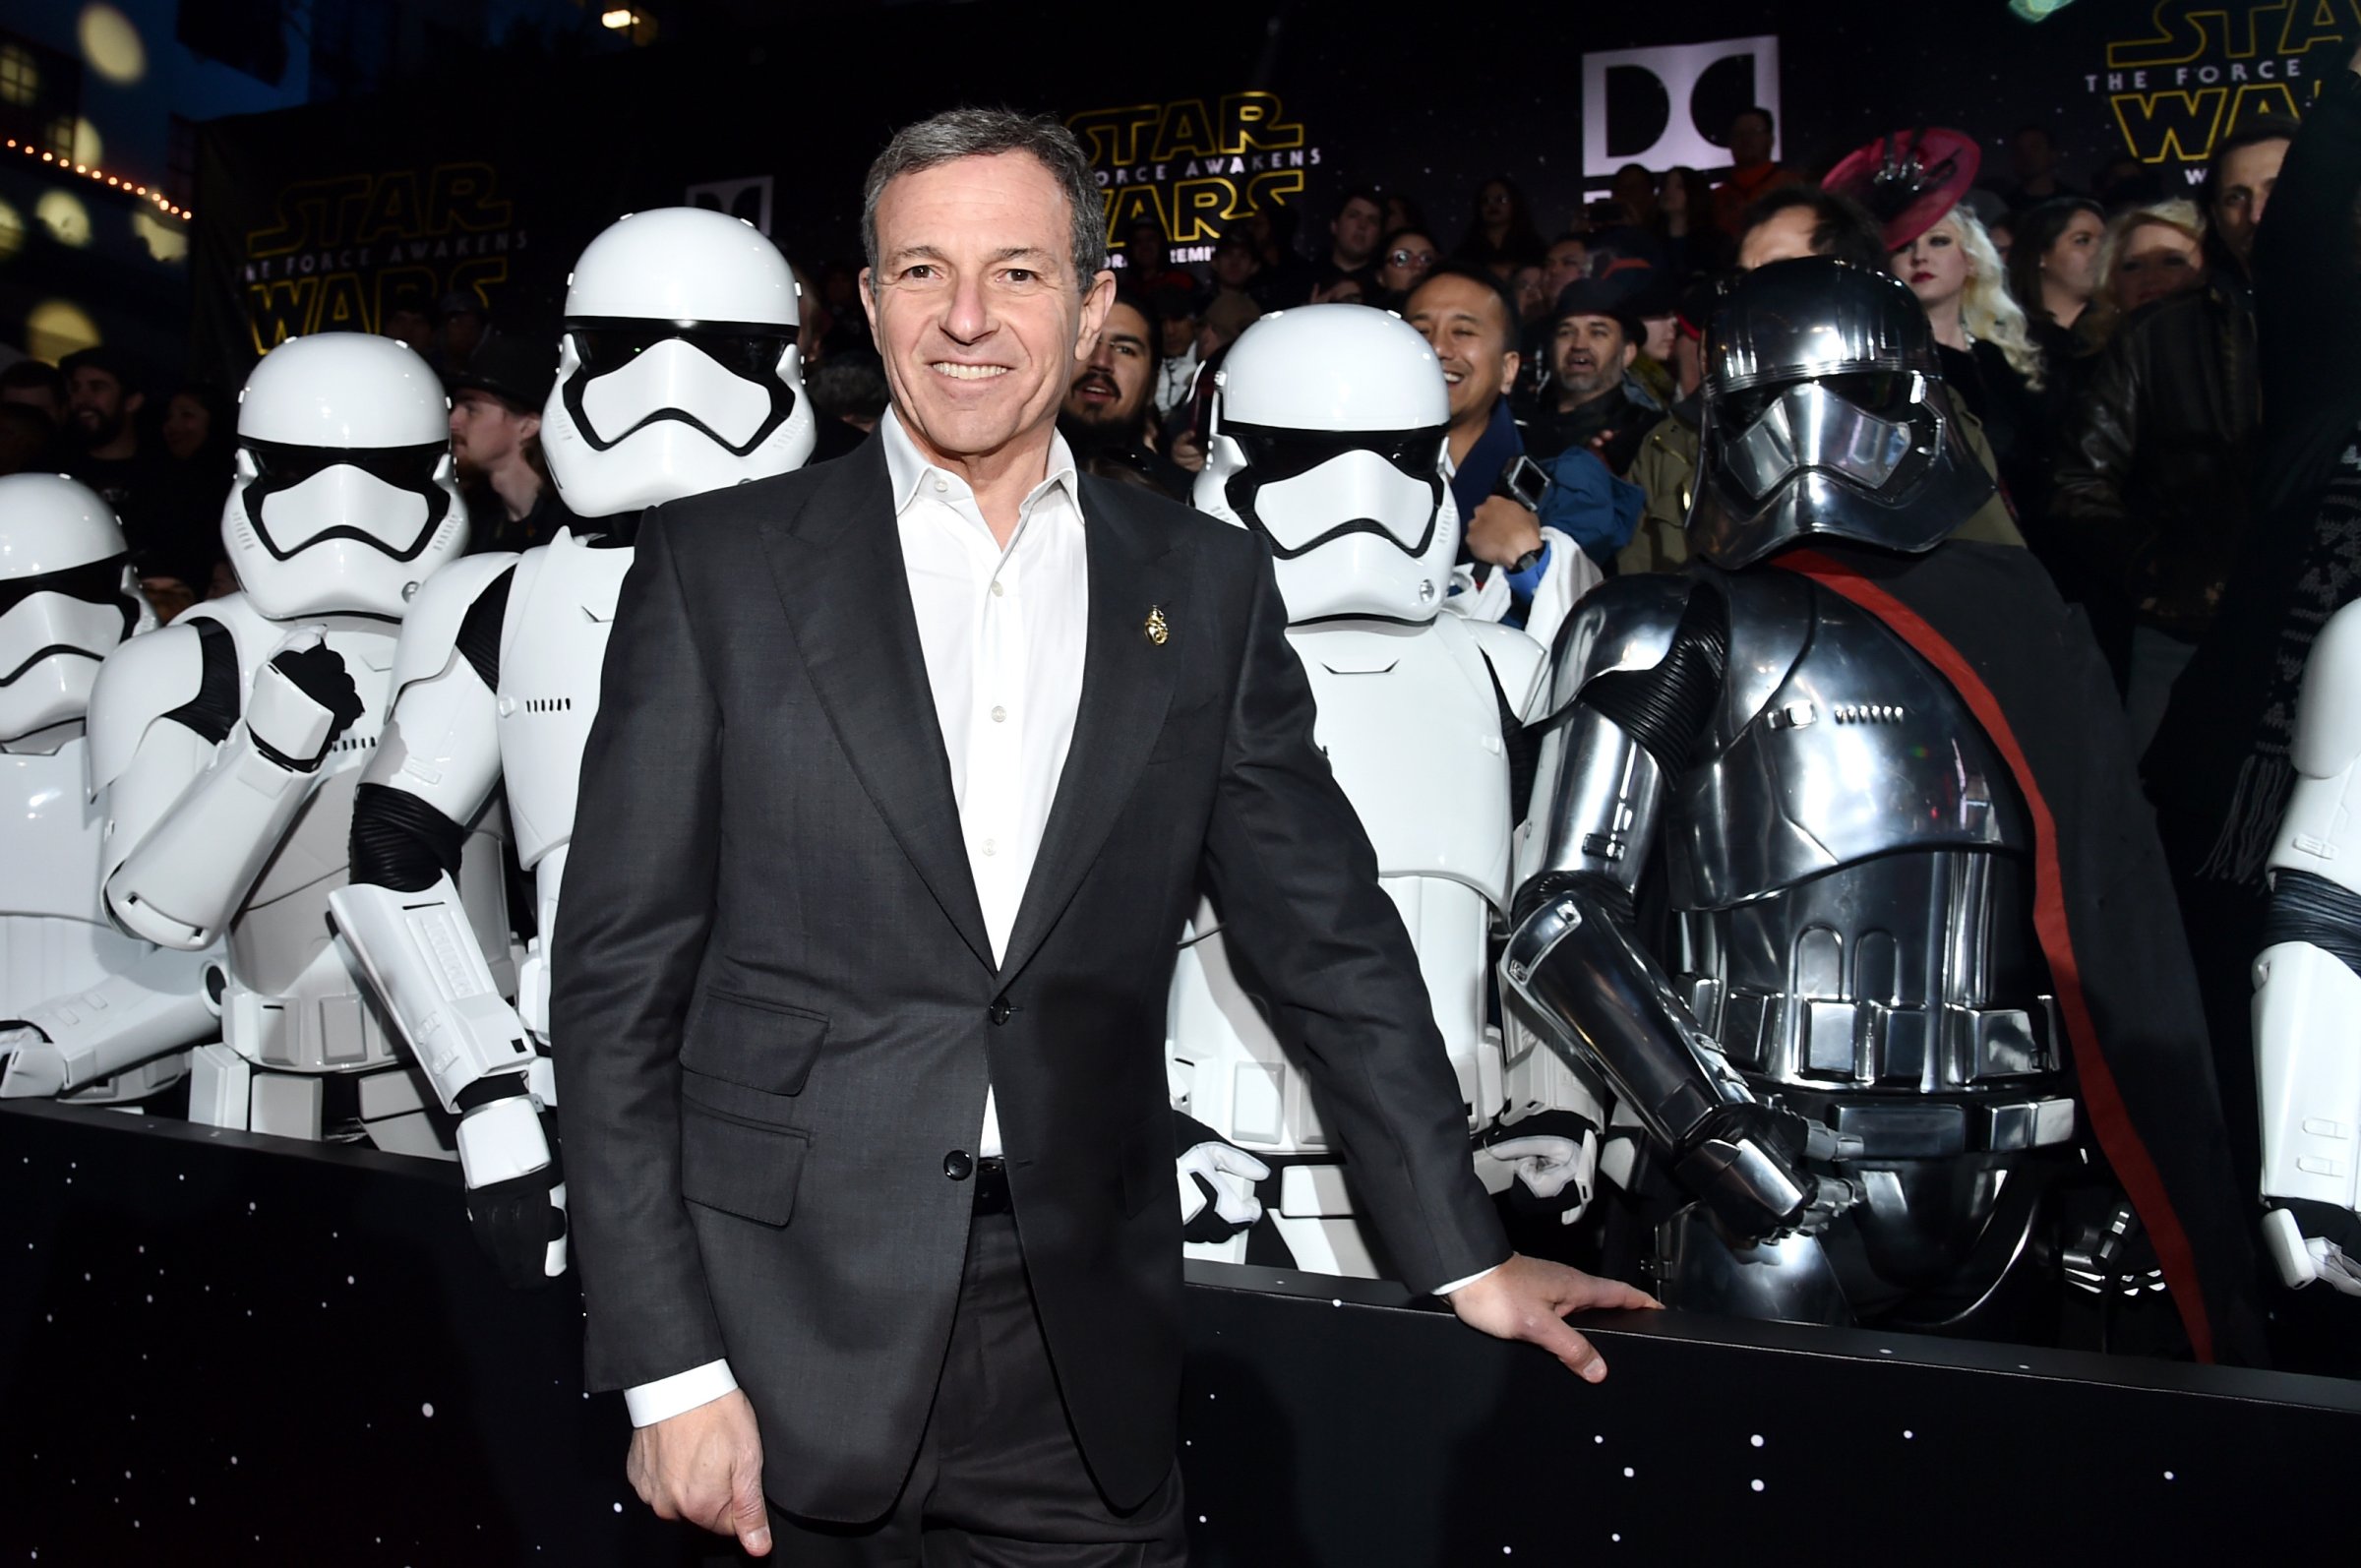 Chairman and CEO, The Walt Disney Company, Bob Iger attends the World Premiere of Star Wars: The Force Awakens at the Dolby, El Capitan, and TCL Theatres on December 14, 2015 in Hollywood, California.